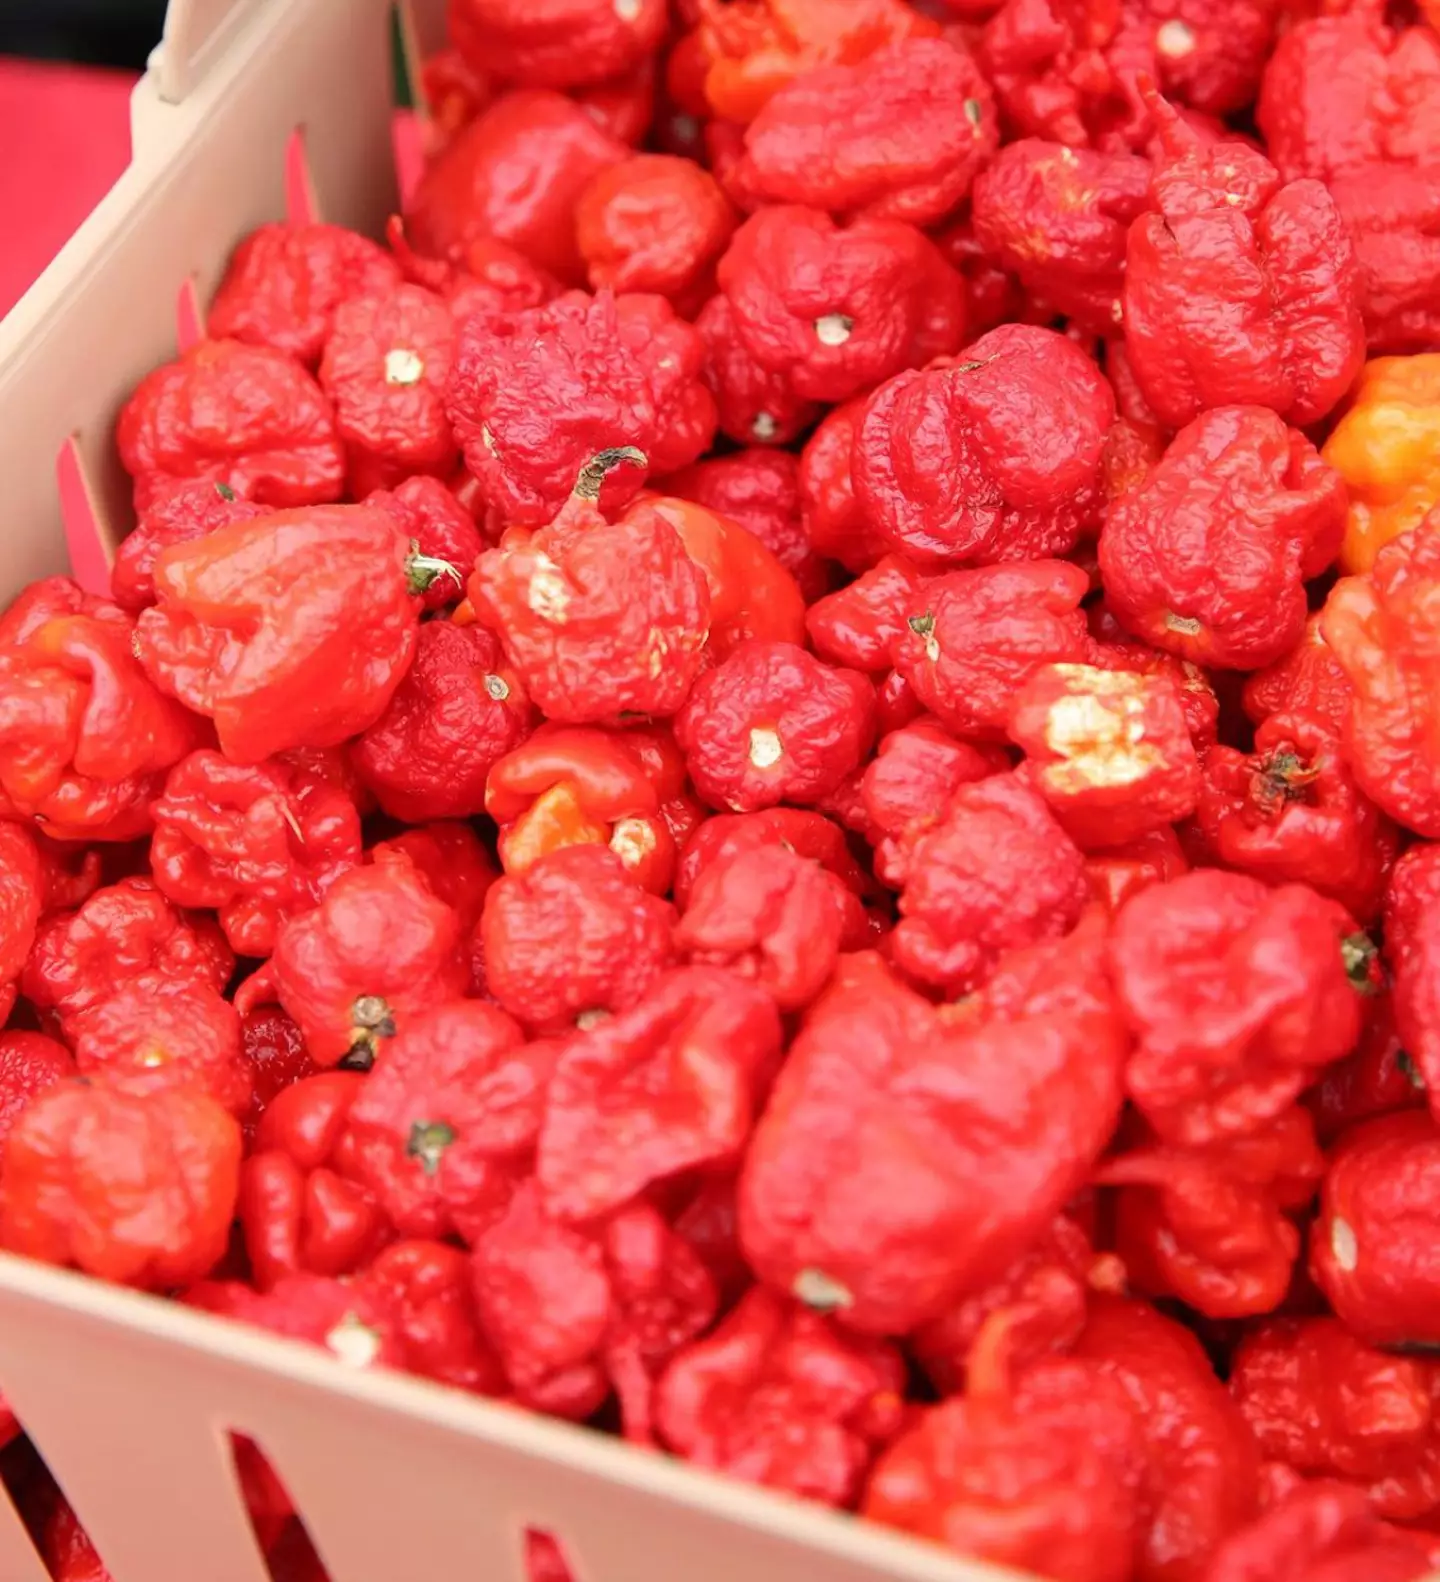 His previous creation, the Carolina Reaper, was the previous champion.